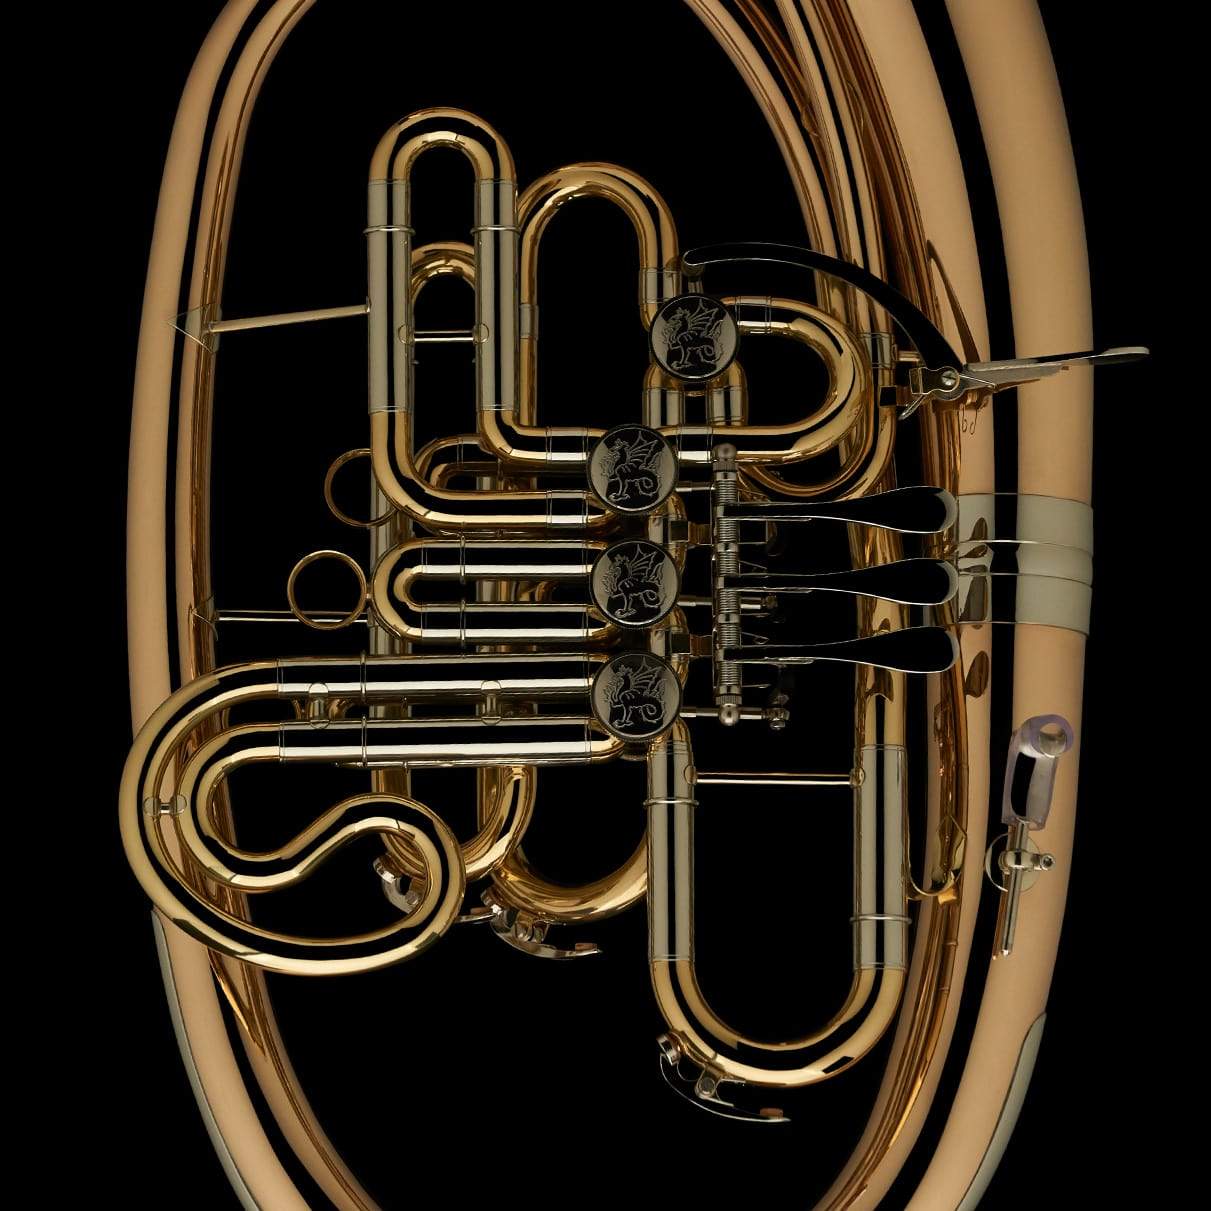 A close up image showing the detail in the tubing and valves of a Bb/F Wagner Tuba from Wessex Tubas